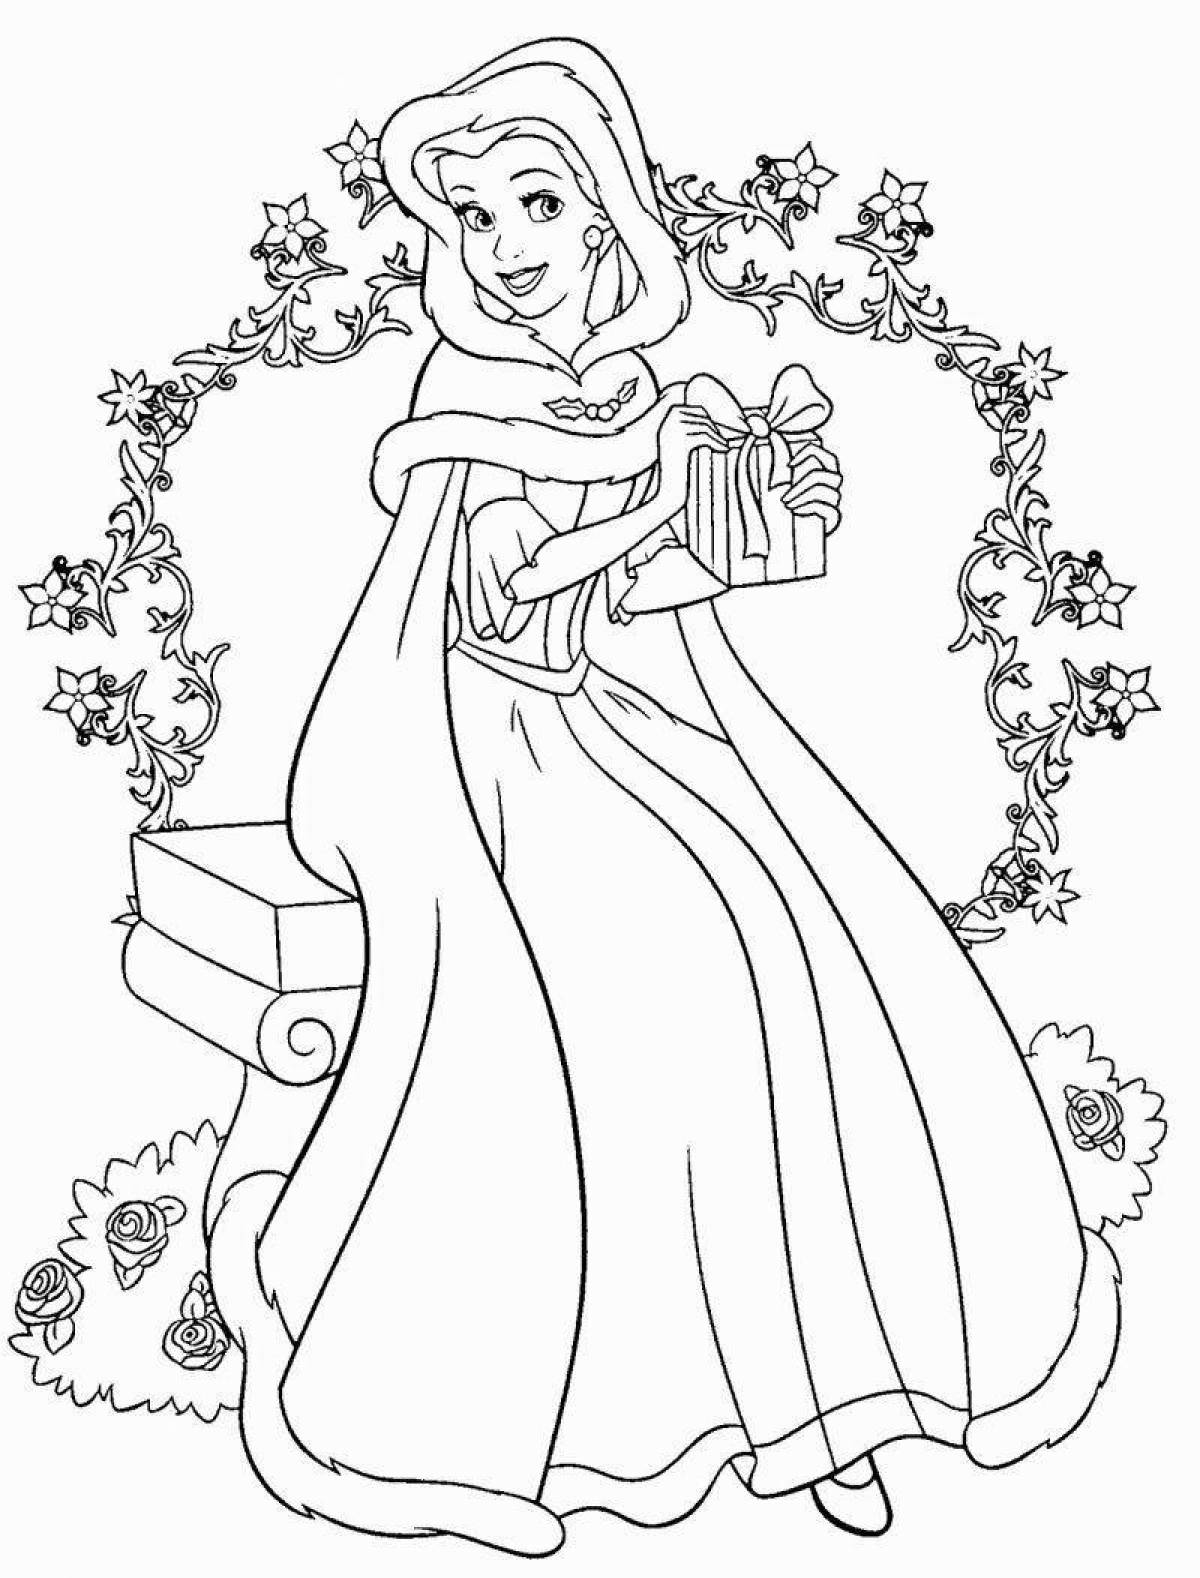 Fun coloring book for kids with disney princesses